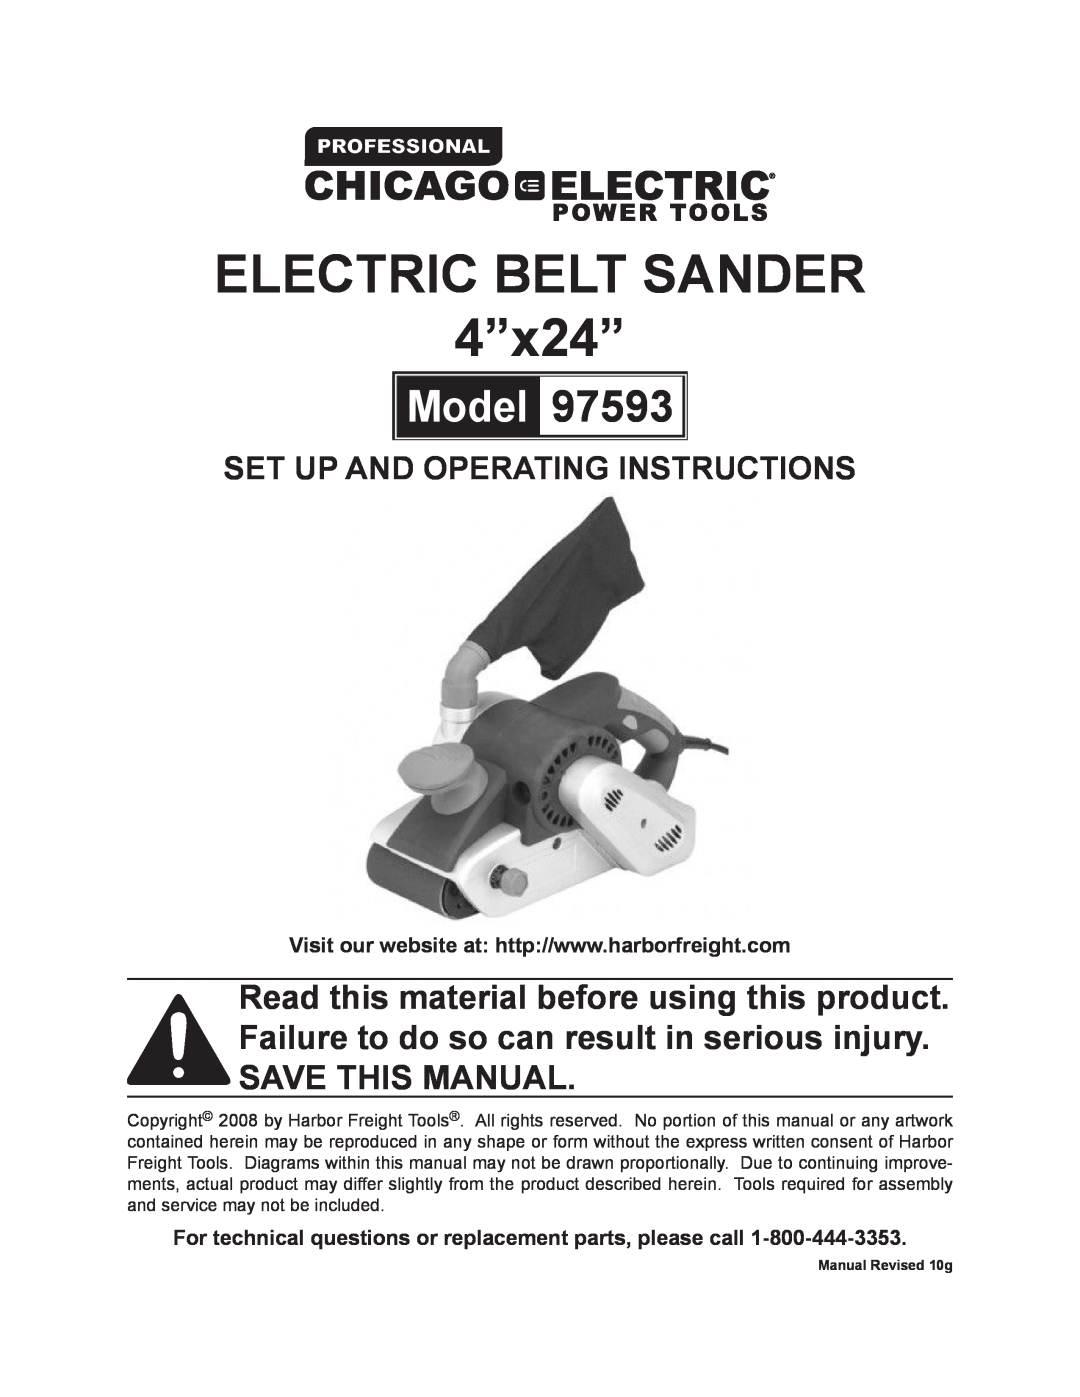 Chicago Electric 97593 operating instructions Electric belt sander 4”x24”, Model, Set up and Operating Instructions 